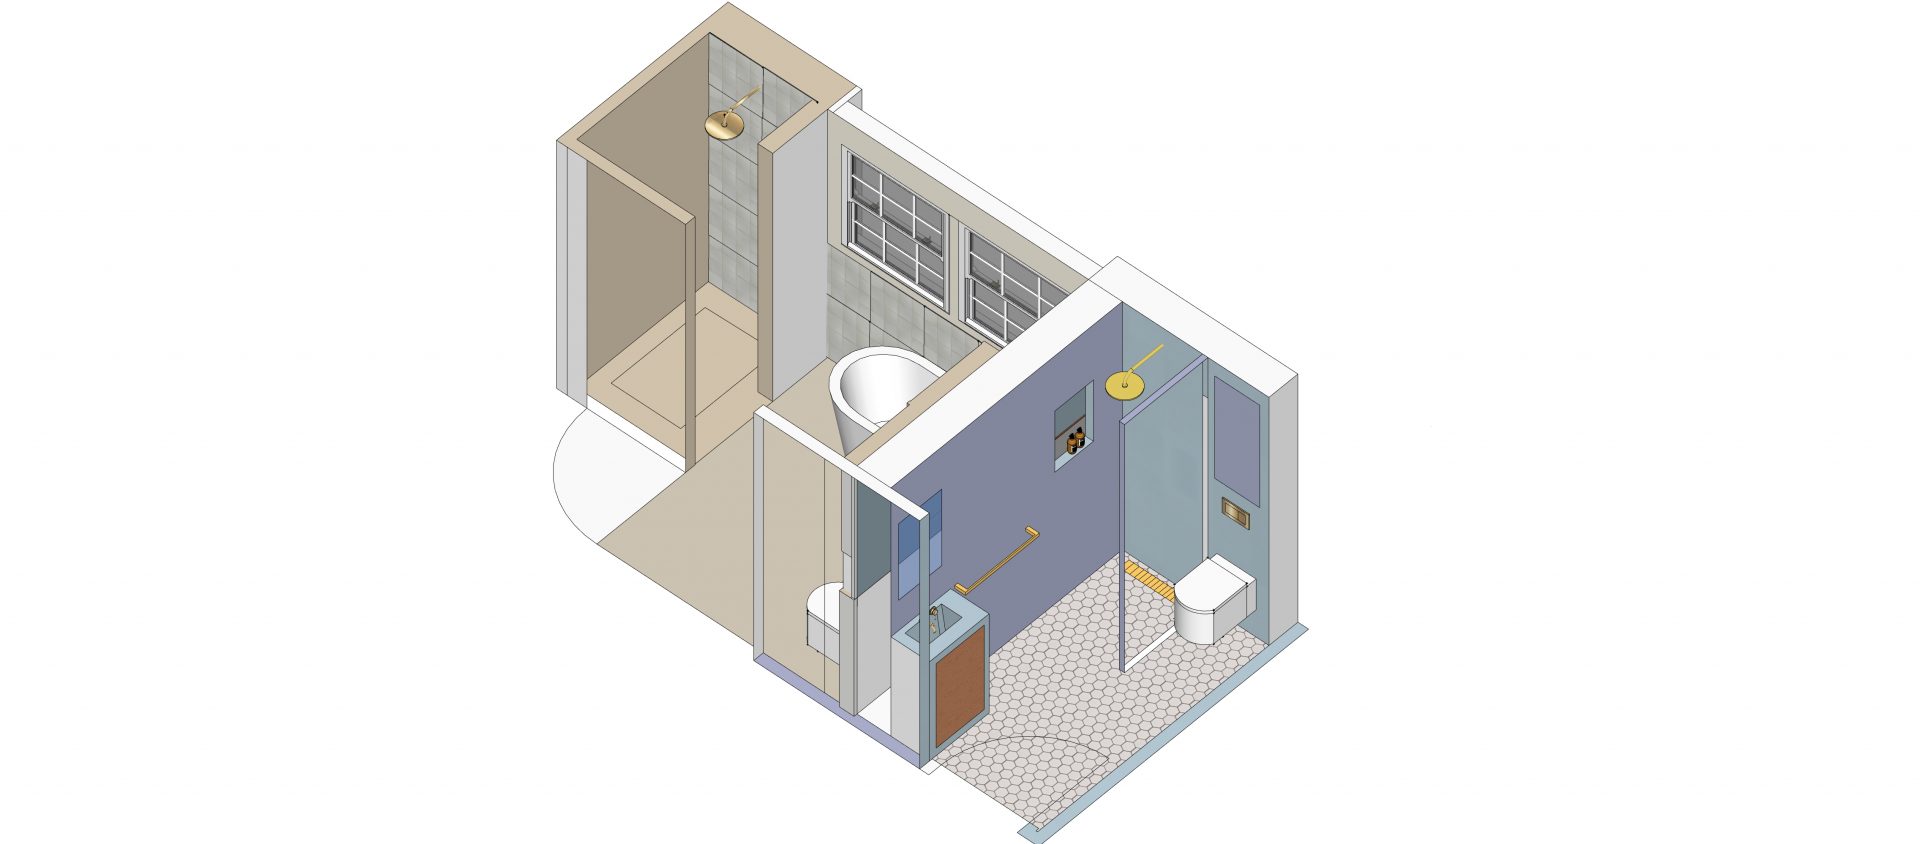 image showing a 3d model of a bathroom design in worthing